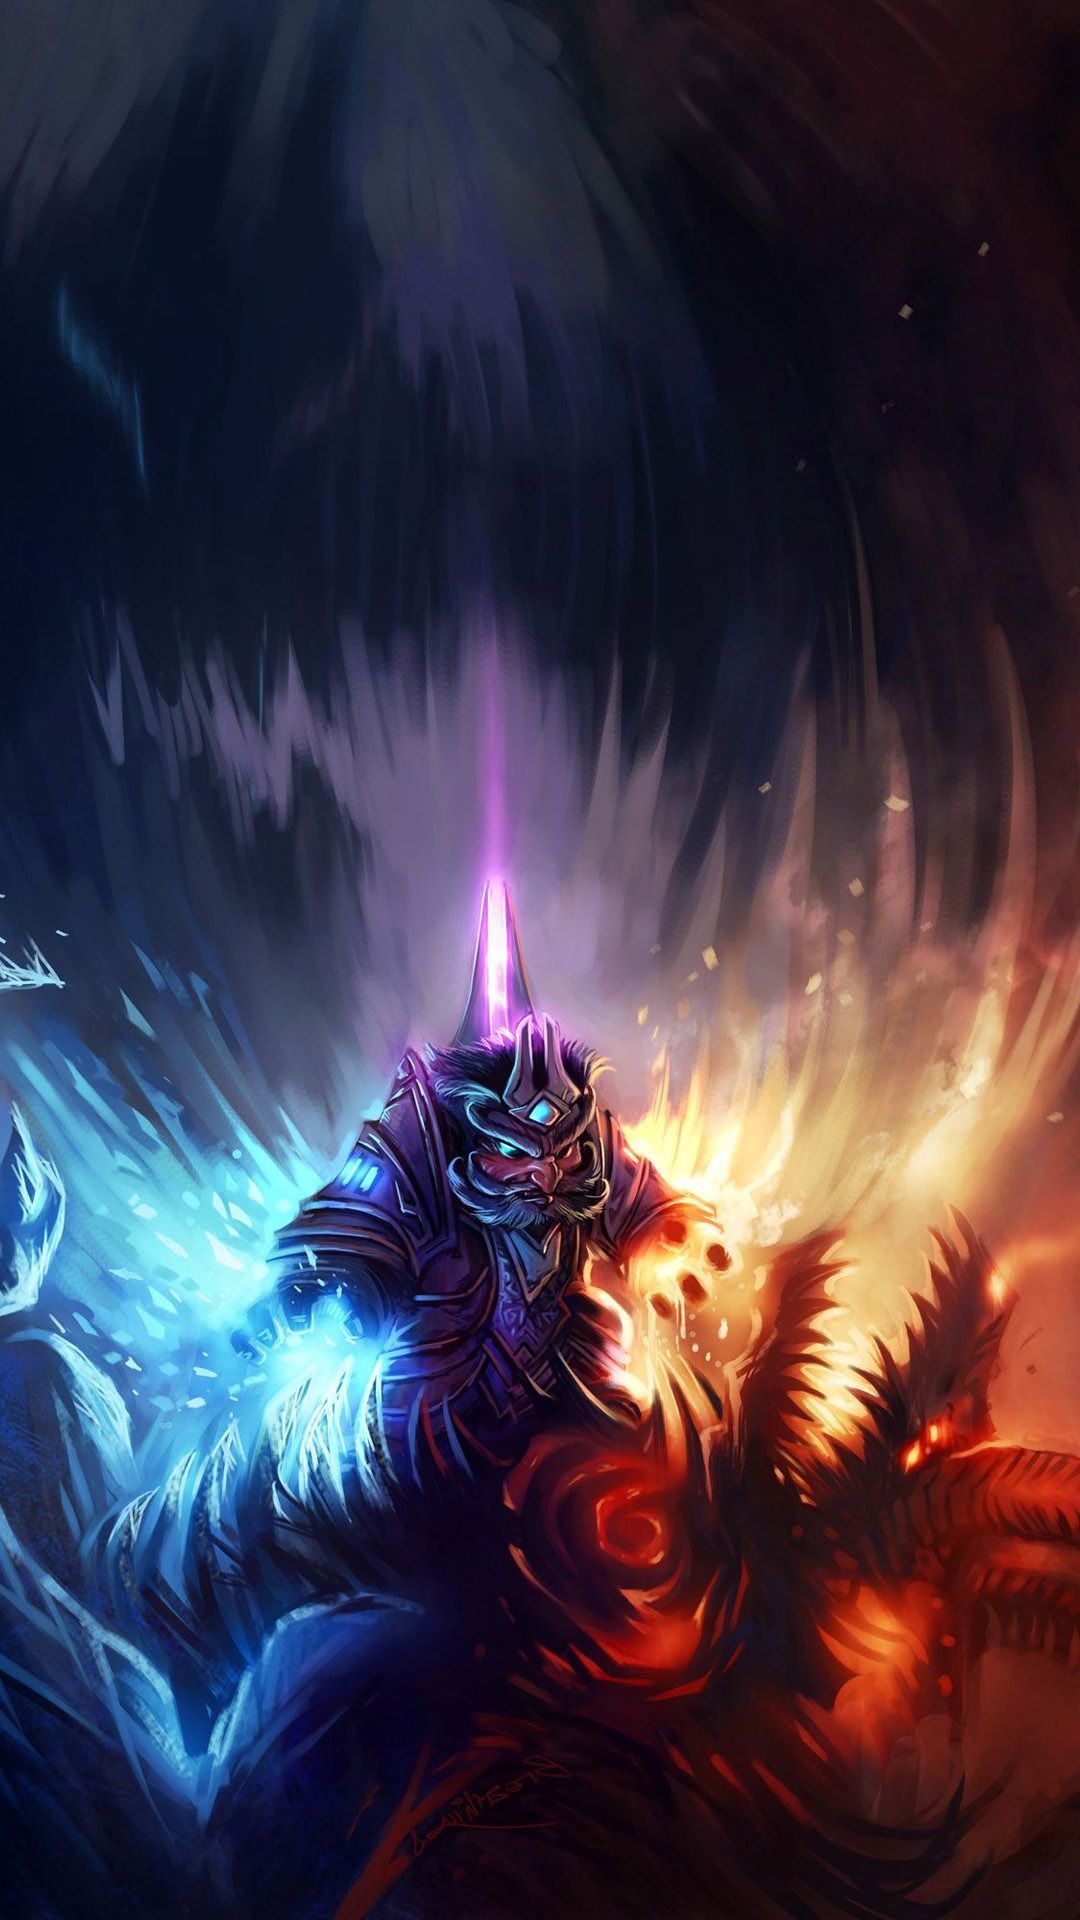 world of warcraft mobile wallpaper Wallpapers